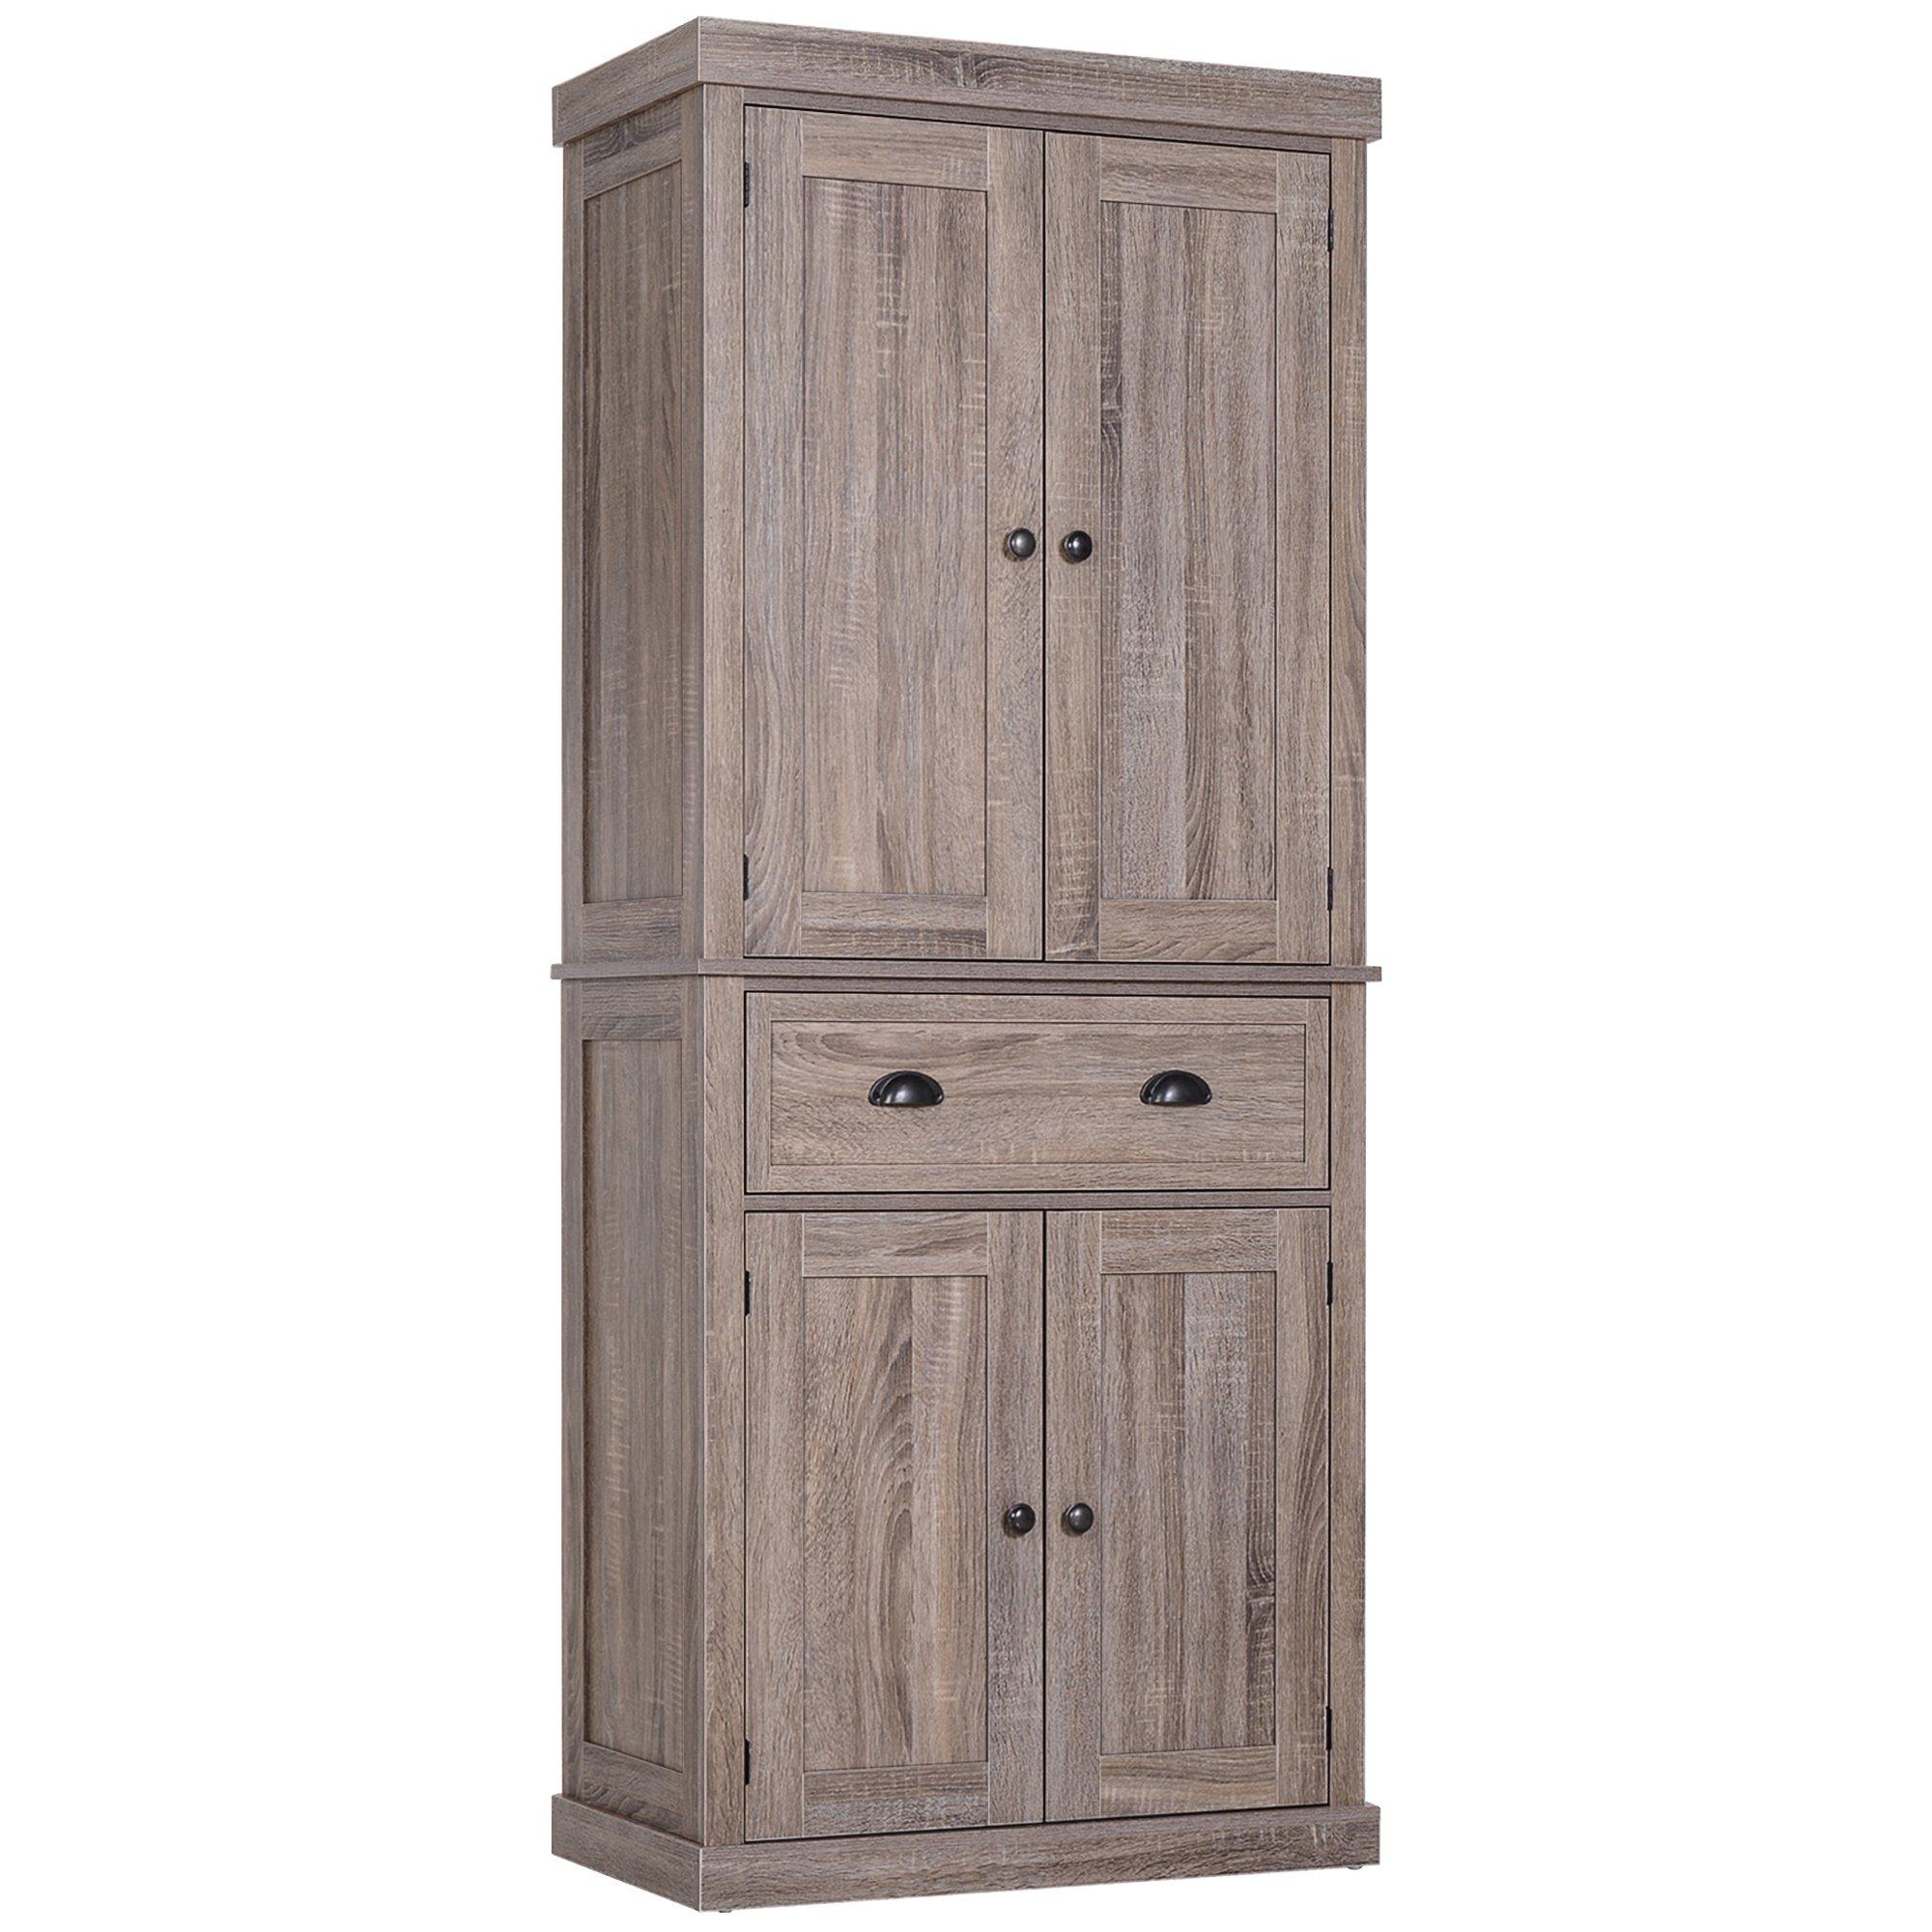 Traditional Colonial Freestanding Kitchen Pantry Cupboard Storage